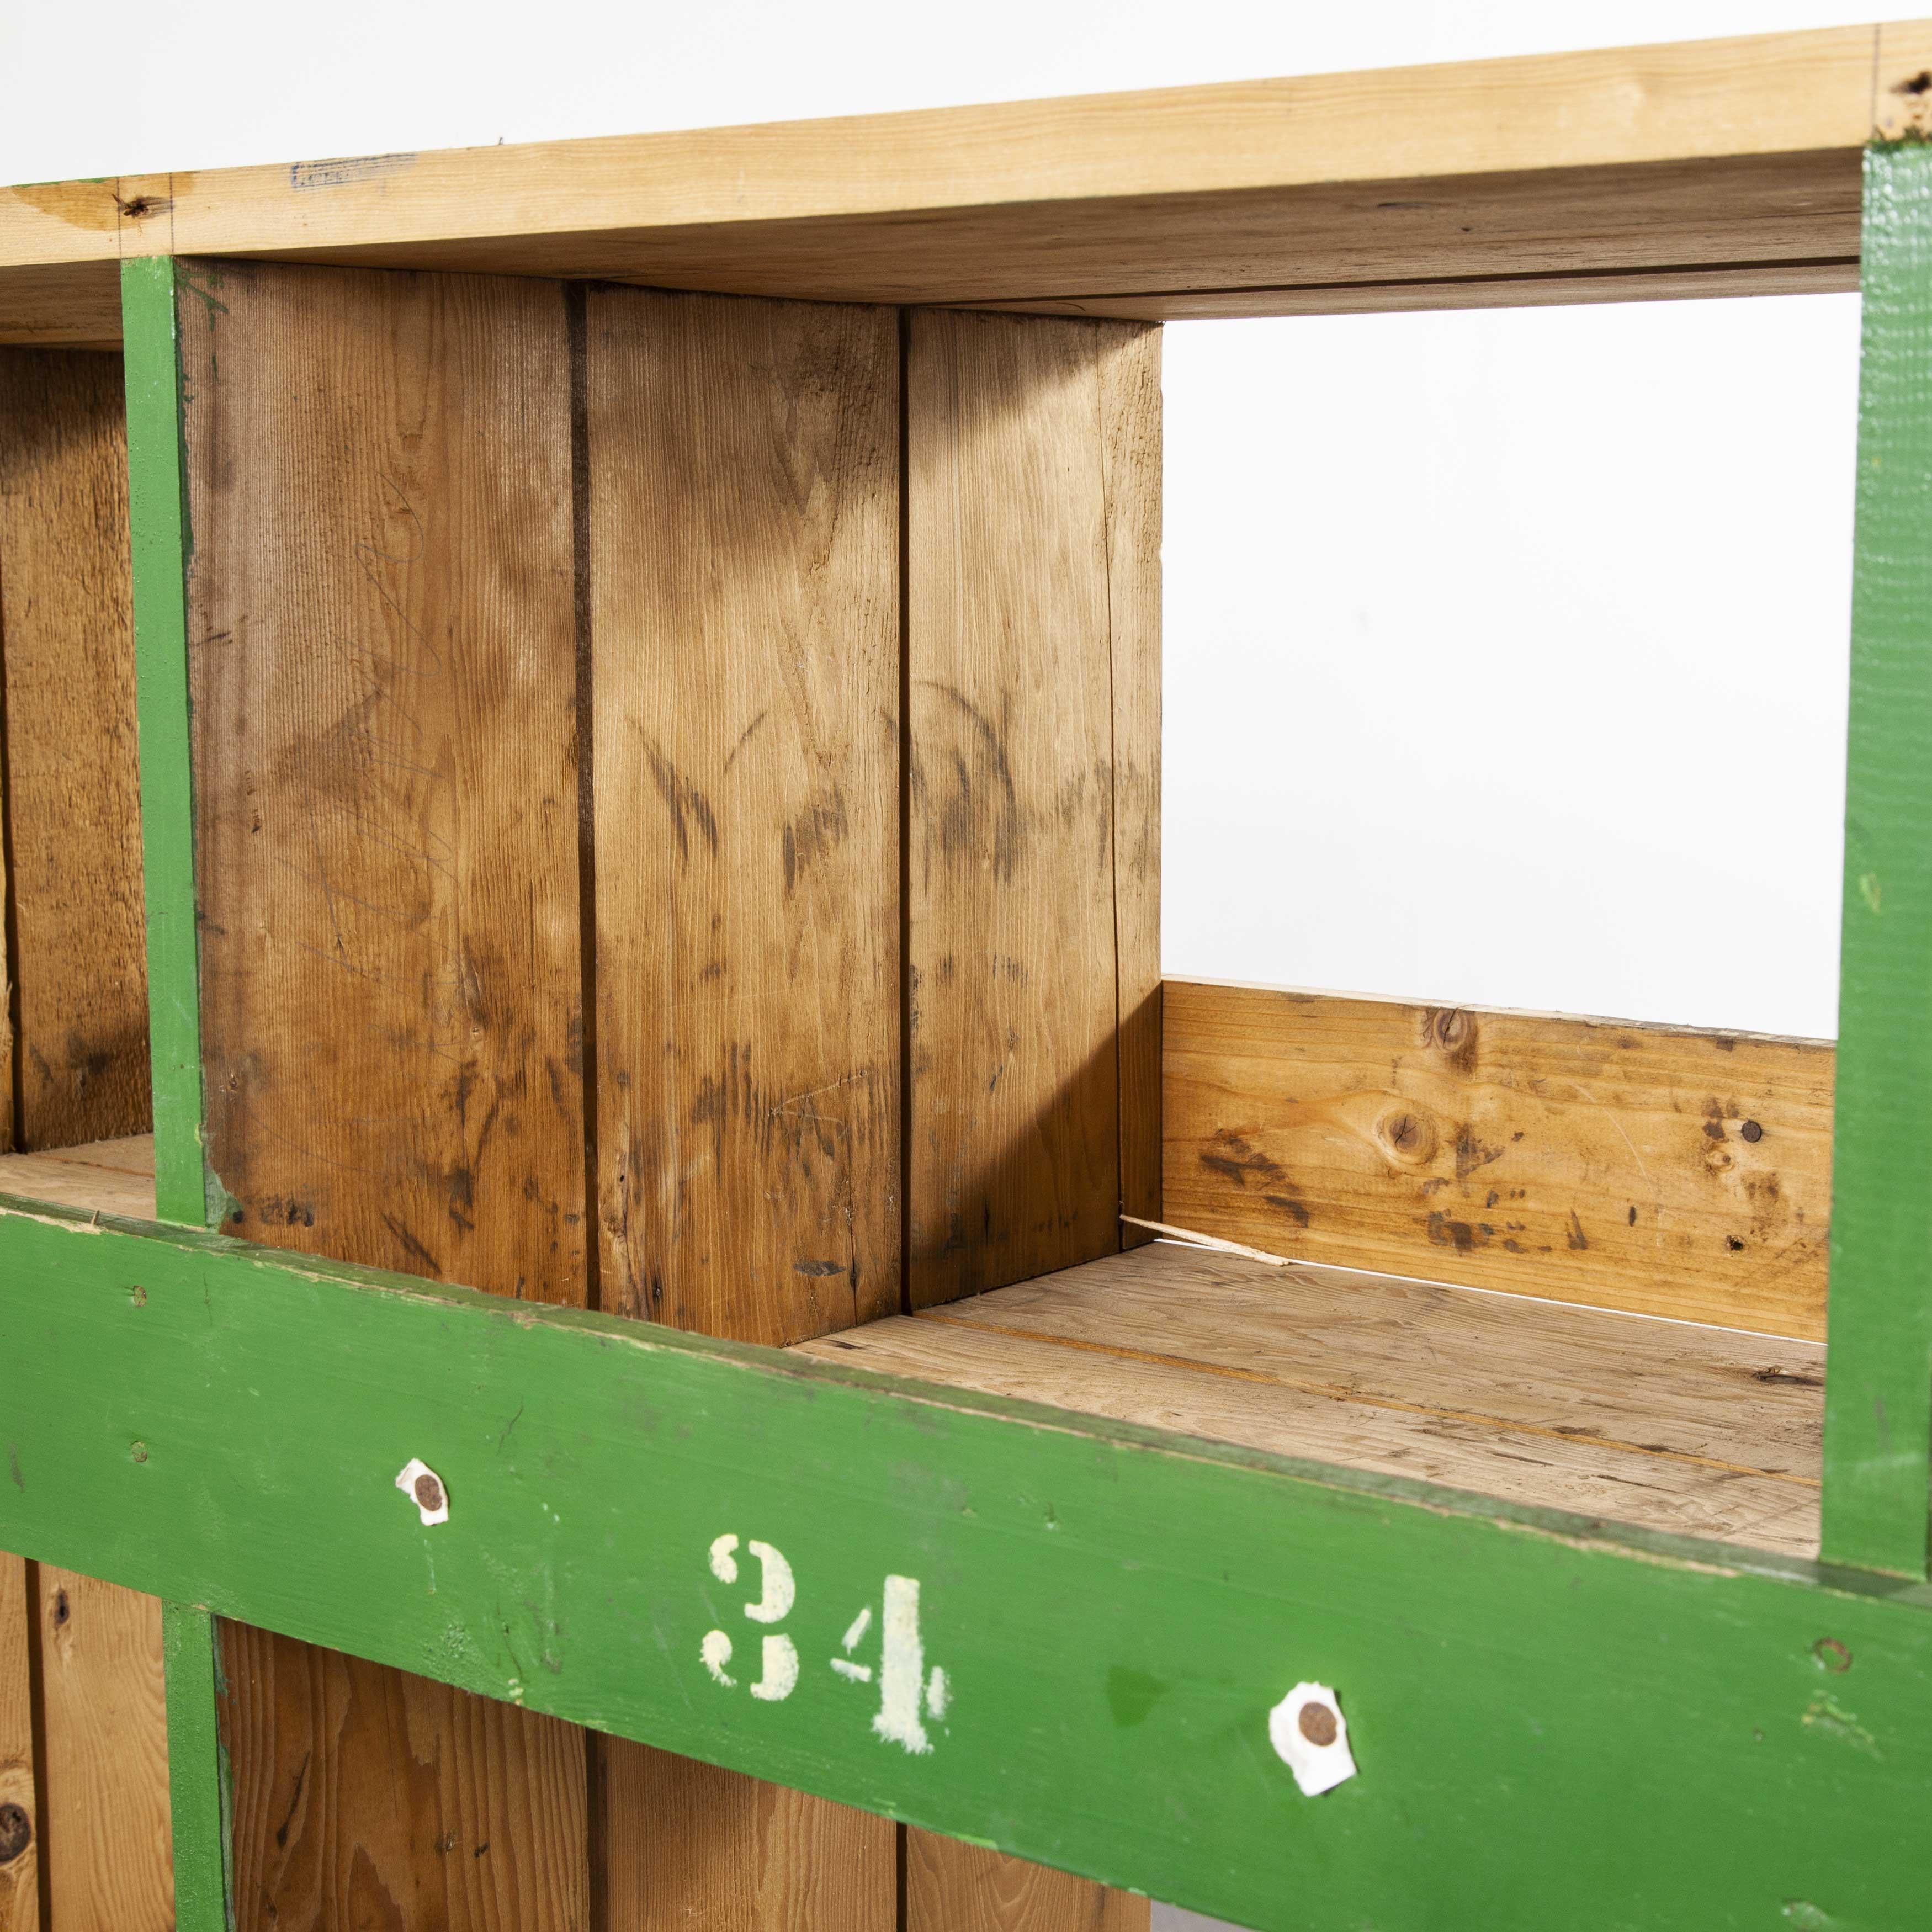 1920s late Victorian pigeon hole unit, storage, shelving unit (Model 7). Sourced from a brickyard in the north of England, outside Hull. The works had been producing bricks for over two hundred years although it sadly stopped production in the